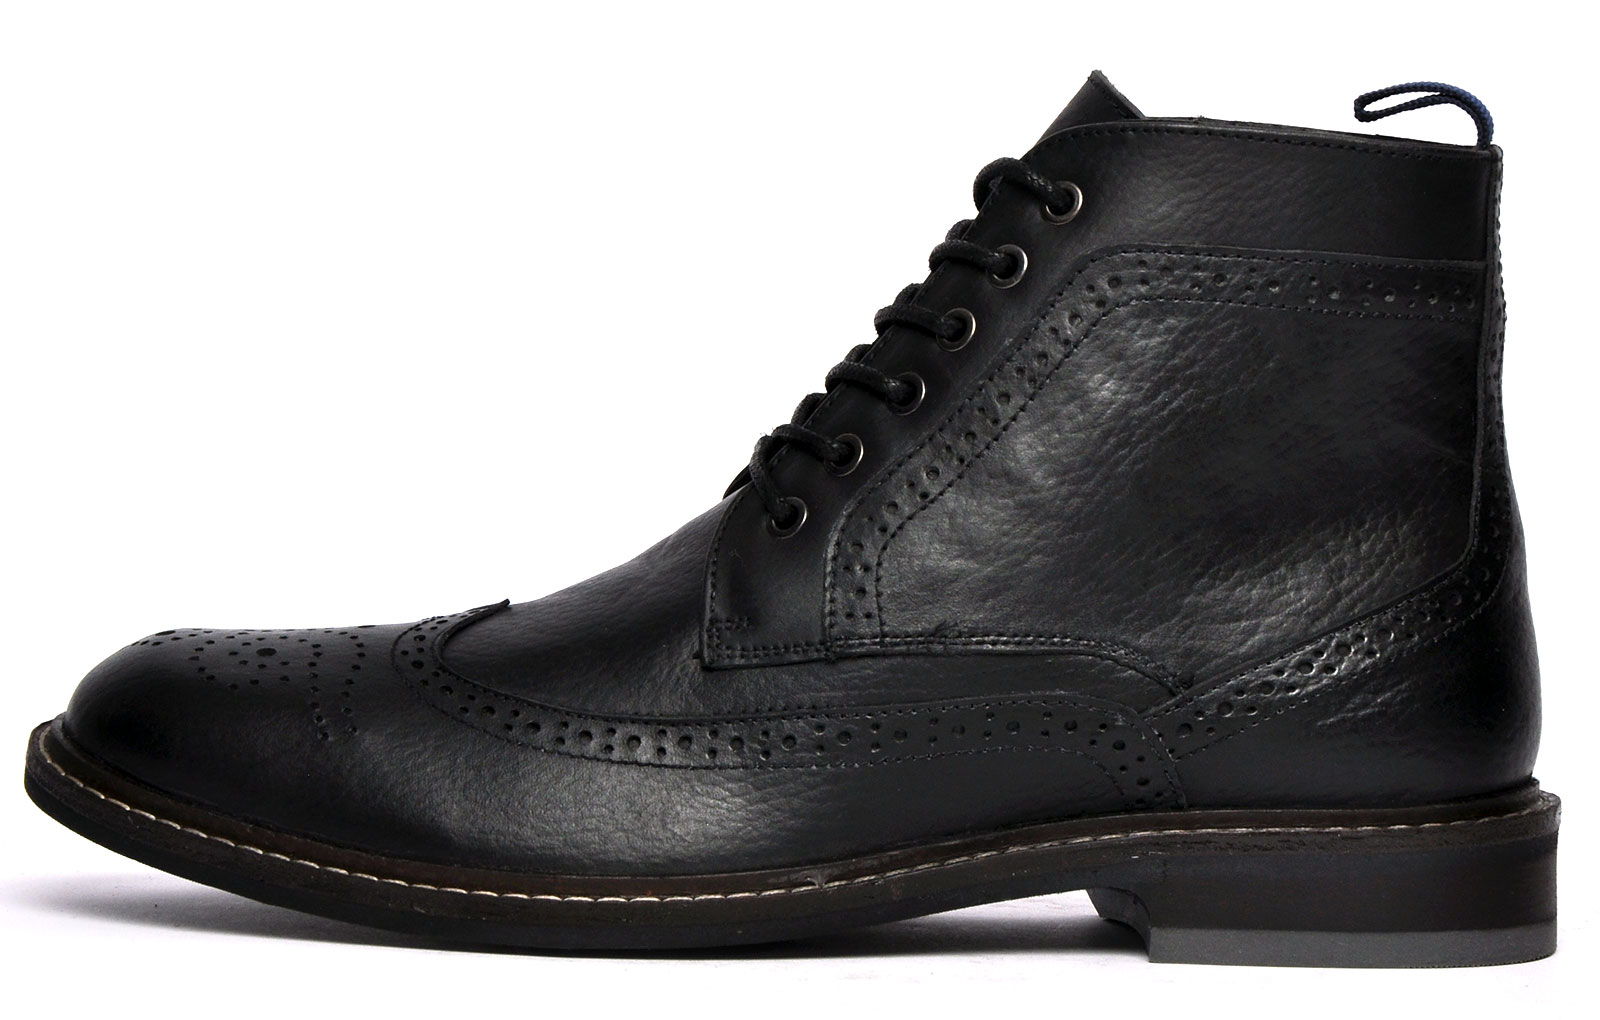 Catesby England Redheugh Brogue Leather Mens - PAT-335174